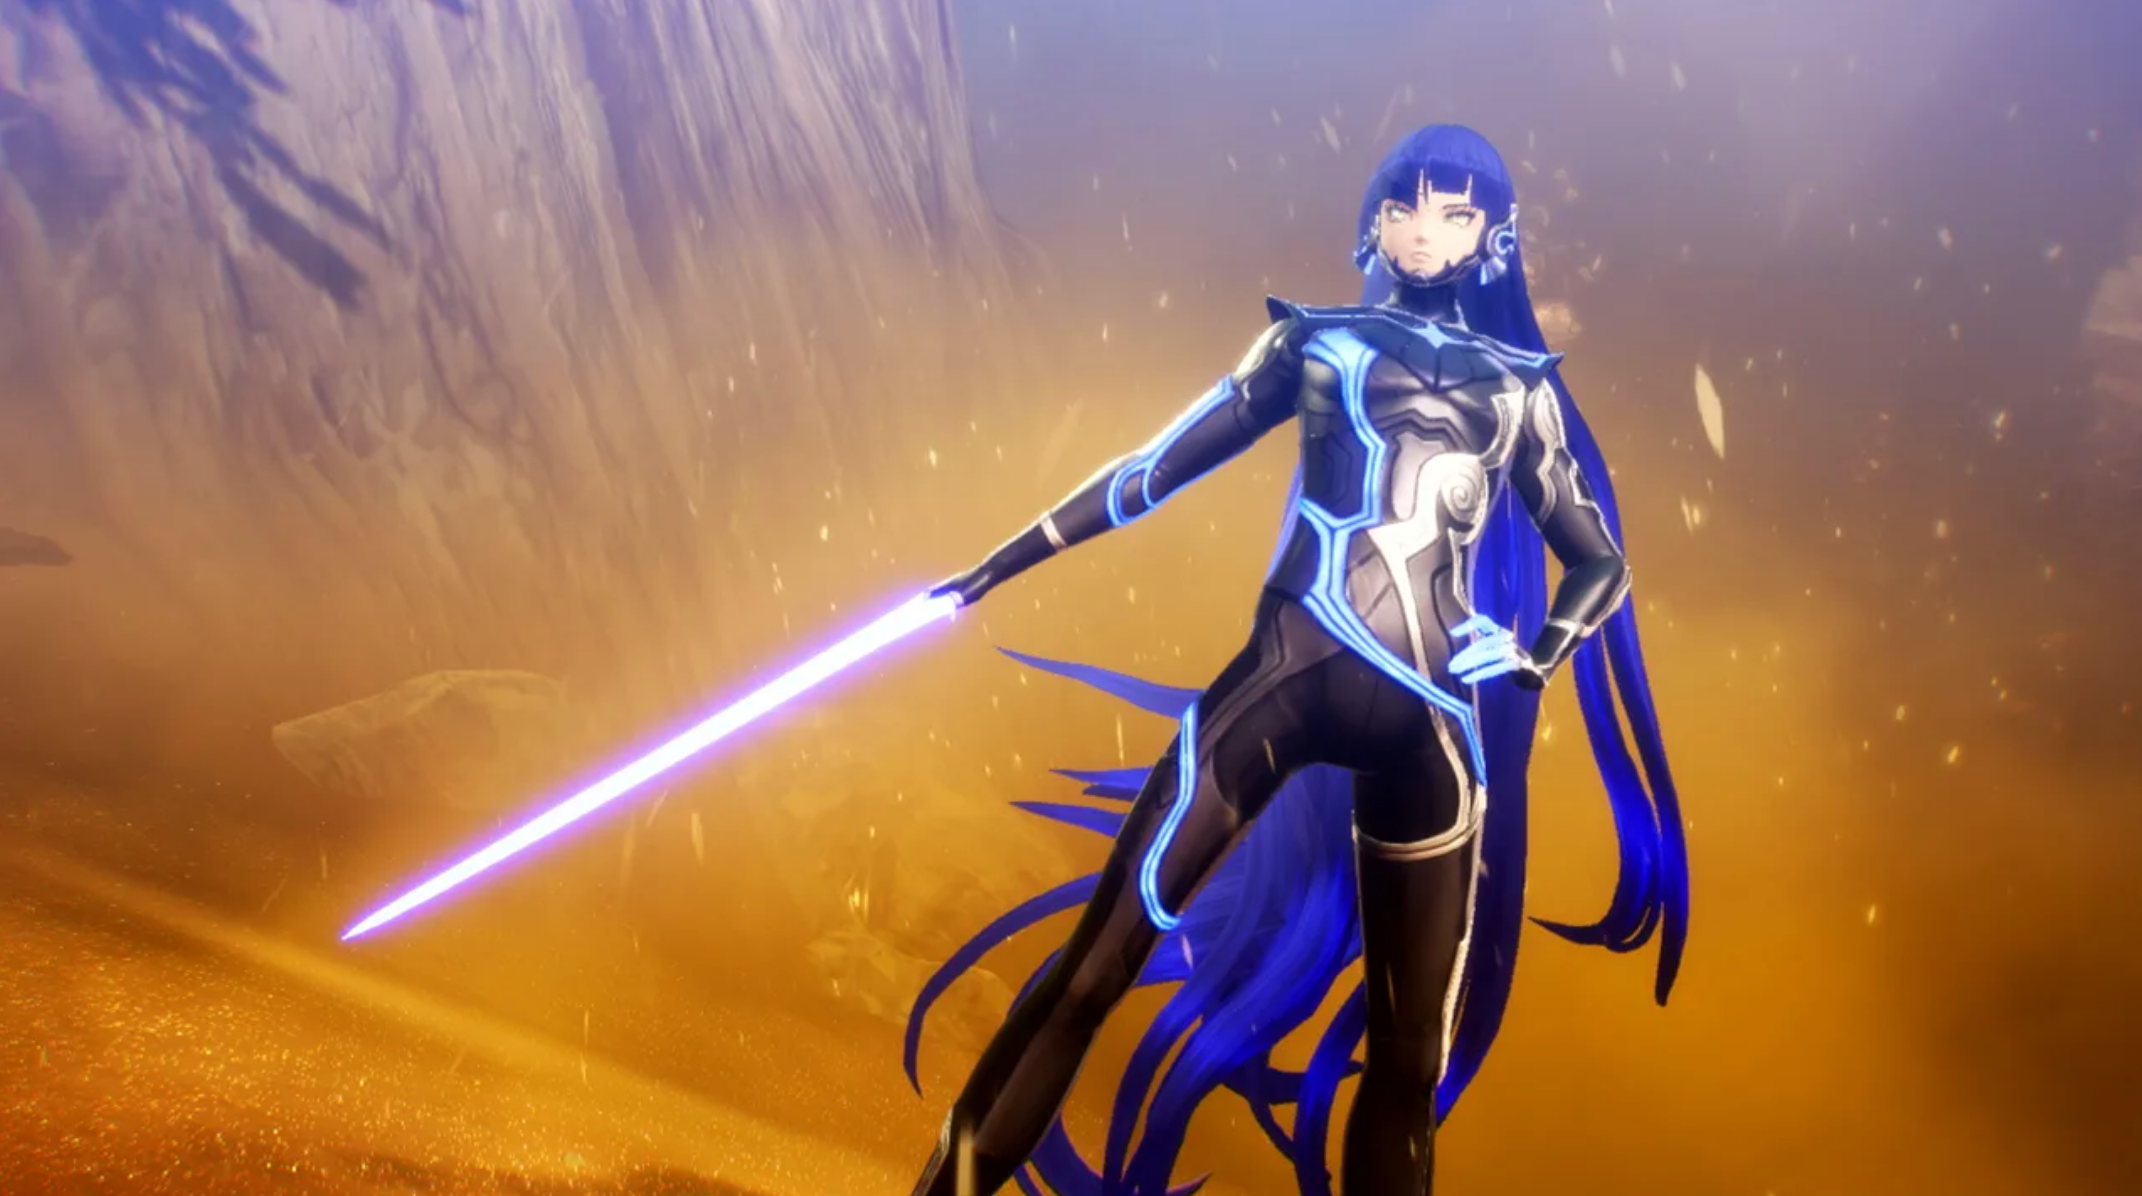 Image for Check out a new Shin Megami Tensei 5 gameplay trailer here